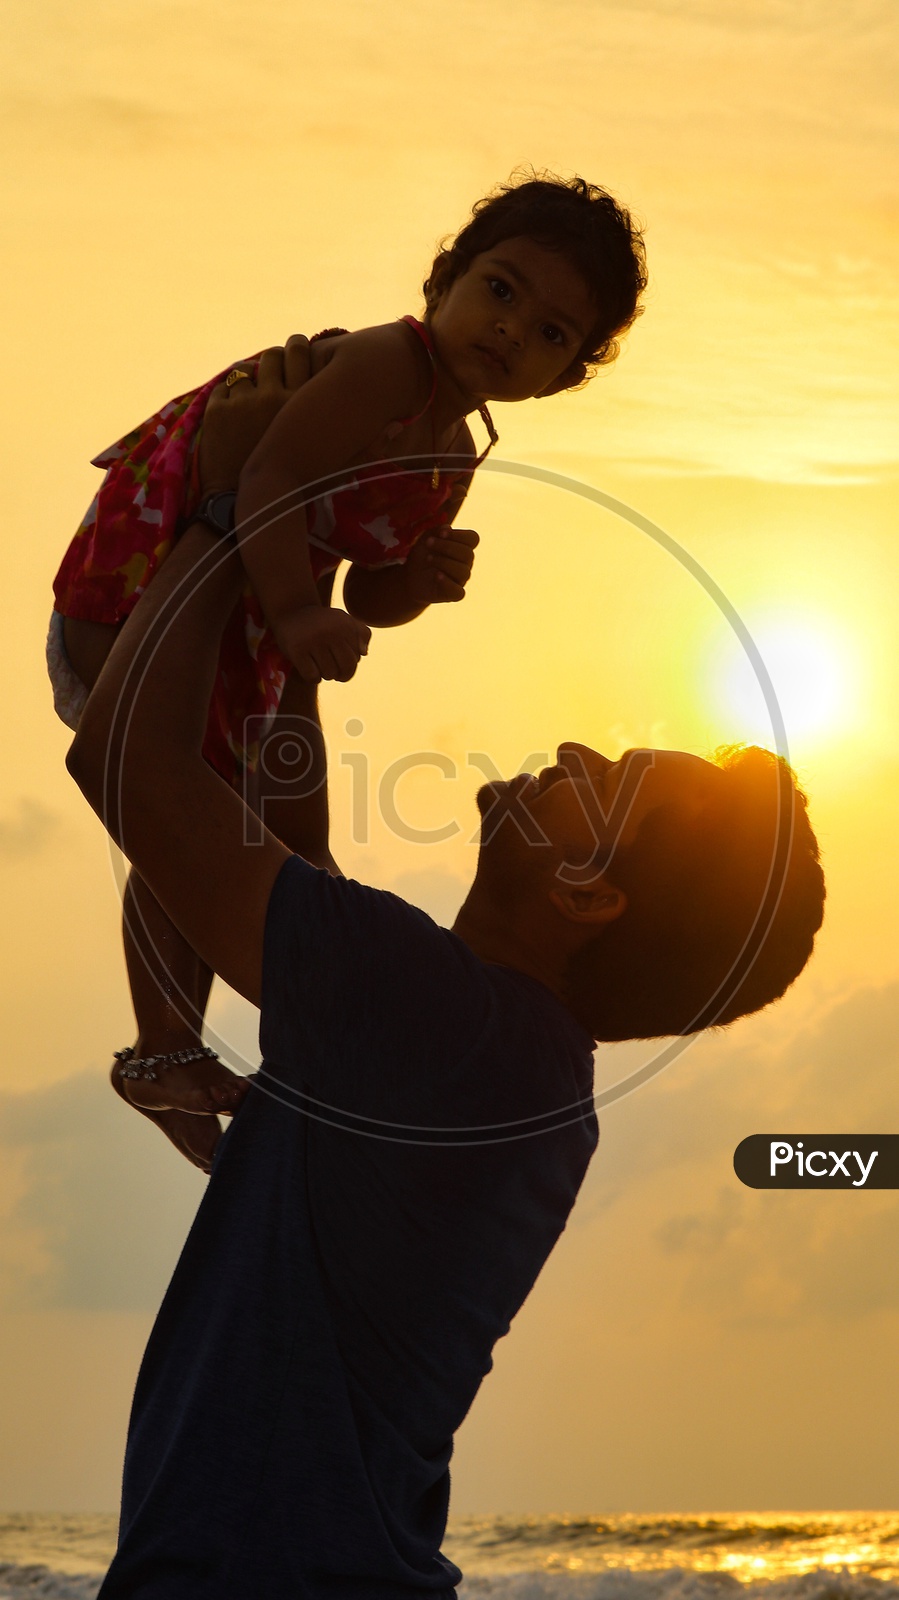 A father playing with his daughter at beach sunrise